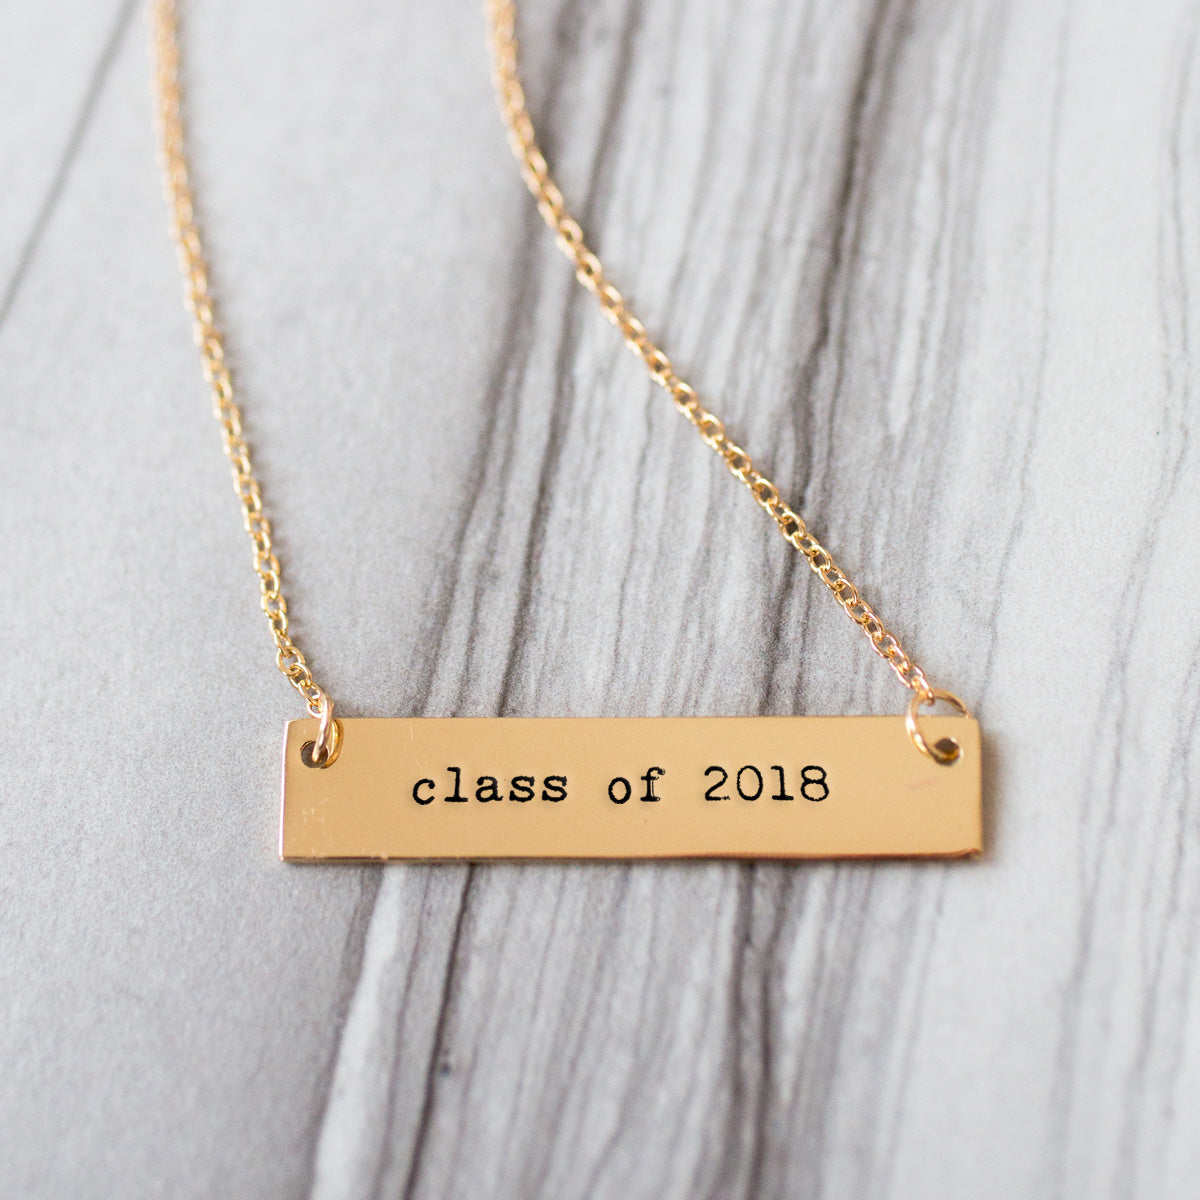 Gold Class of 2018 Bar Necklace